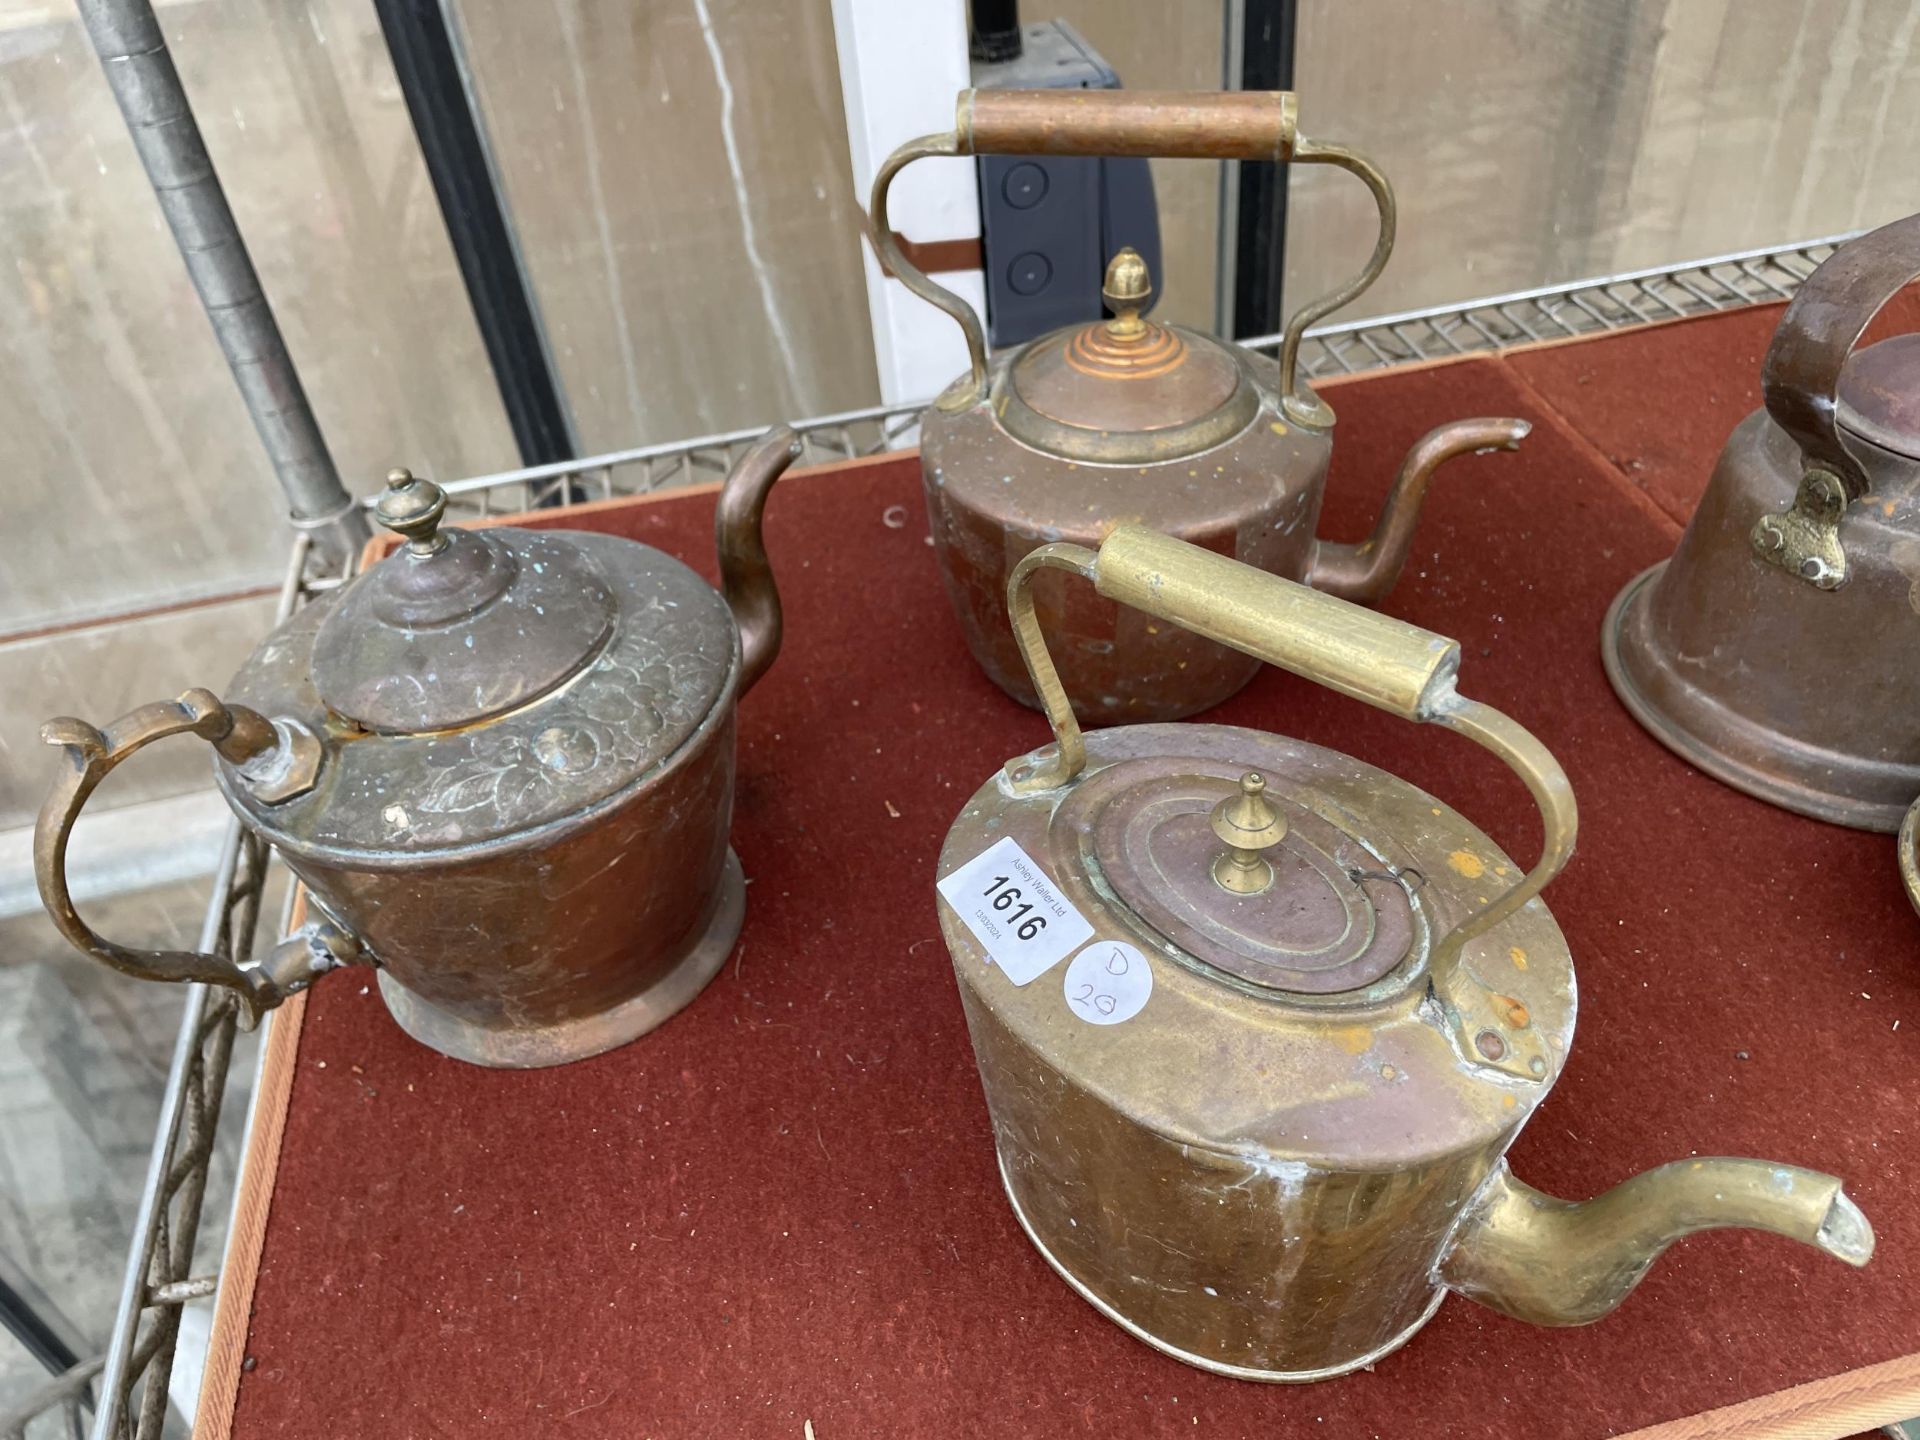 THREE SMALL KETTLES TO INCLUDE ONE BRASS AND TWO COPPER - Image 2 of 2